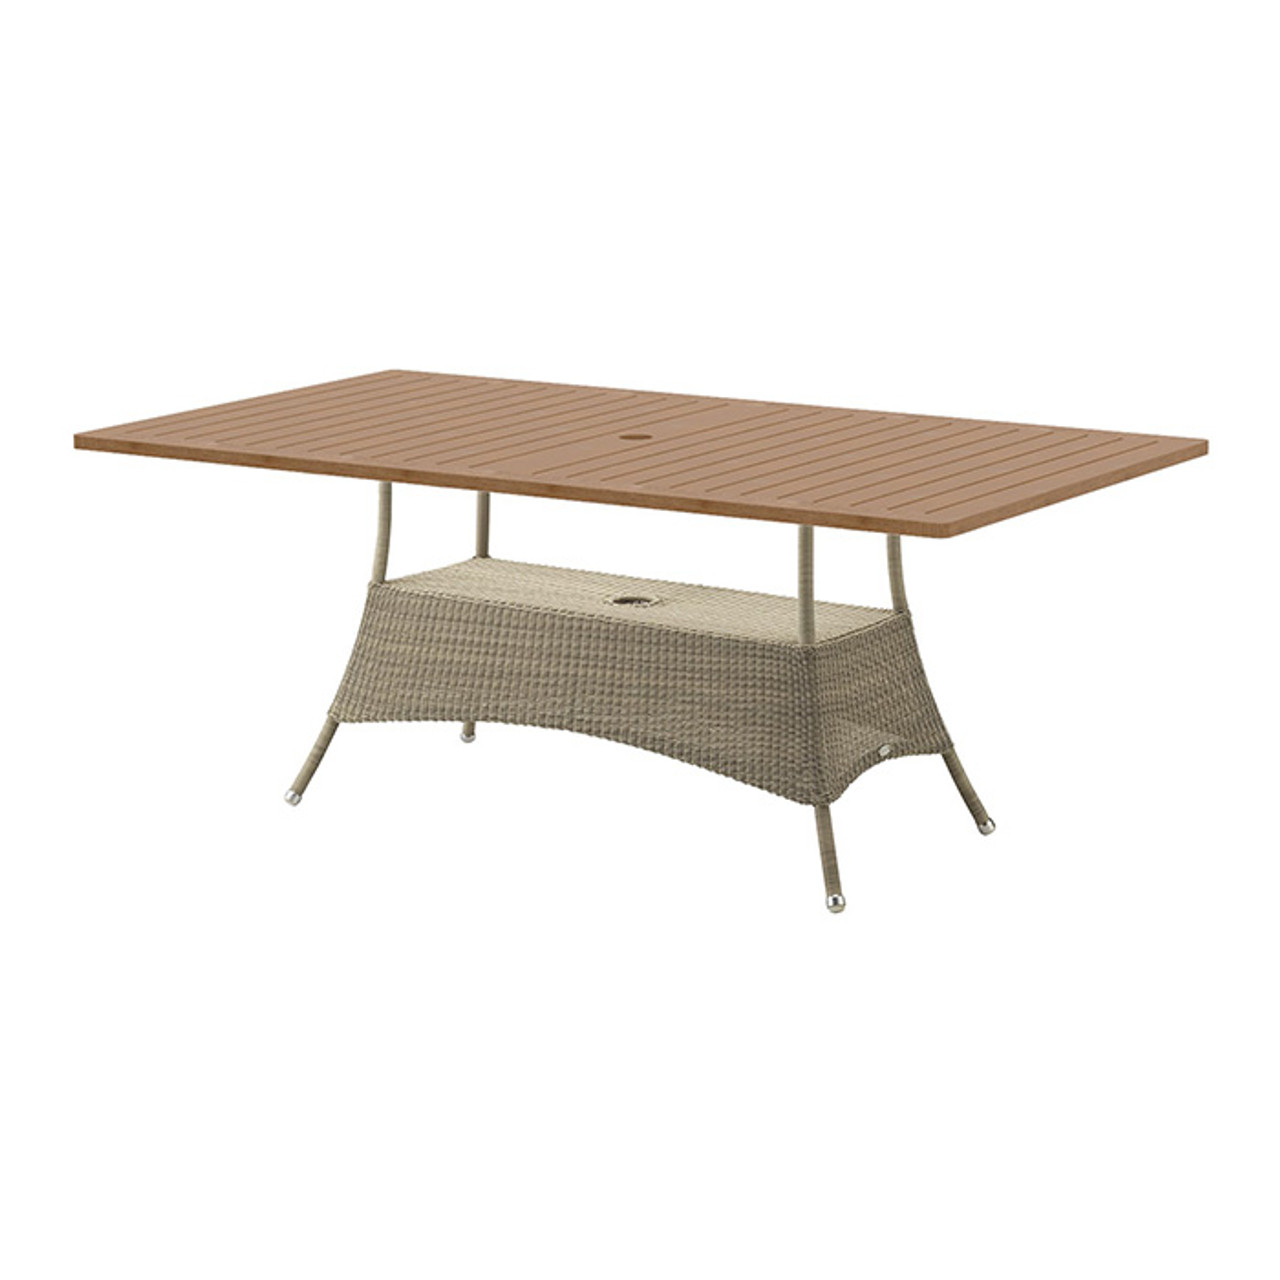 https://cdn11.bigcommerce.com/s-8xfpn87w2v/images/stencil/1280x1280/products/8618/115287/cane-line-dining-table__96908.1649702701.jpg?c=1